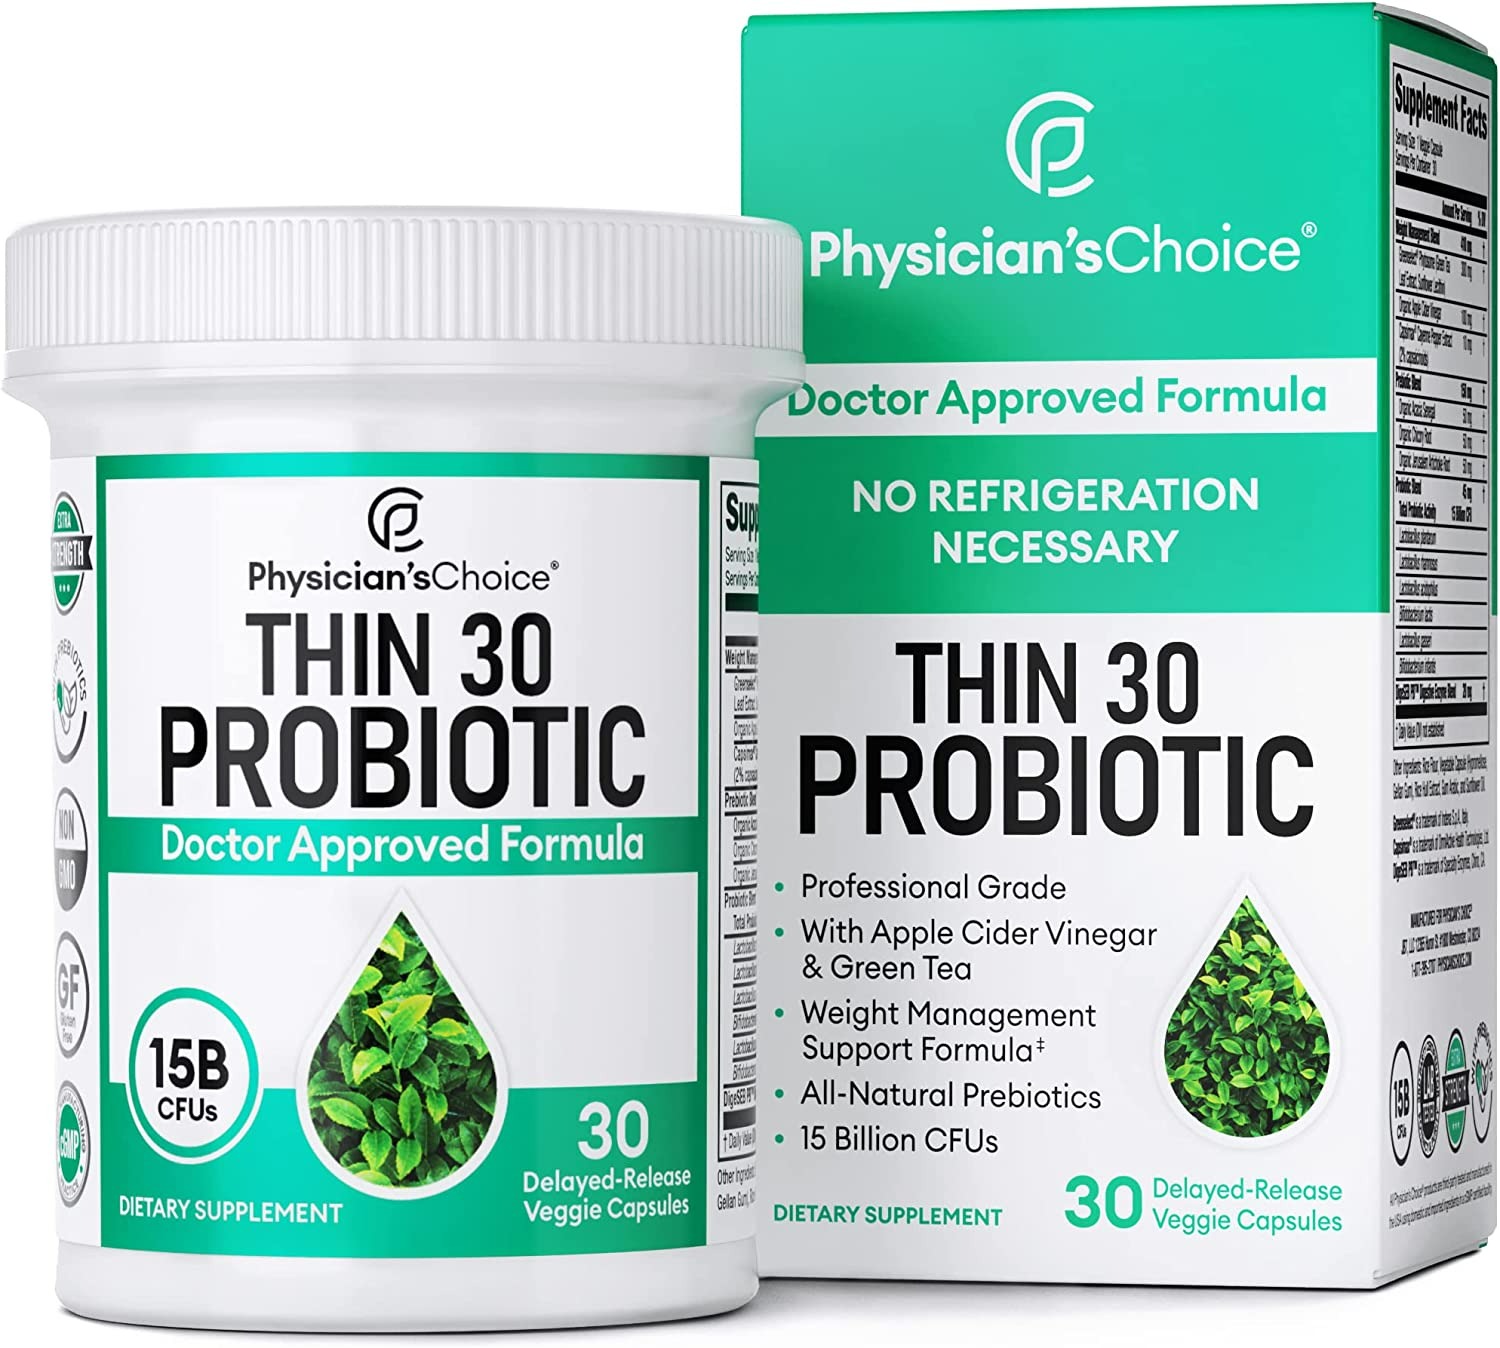 Physician's Choice Probiotics for Weight Management & Bloating- 6 Probiotic Strains - 30 Adet-0